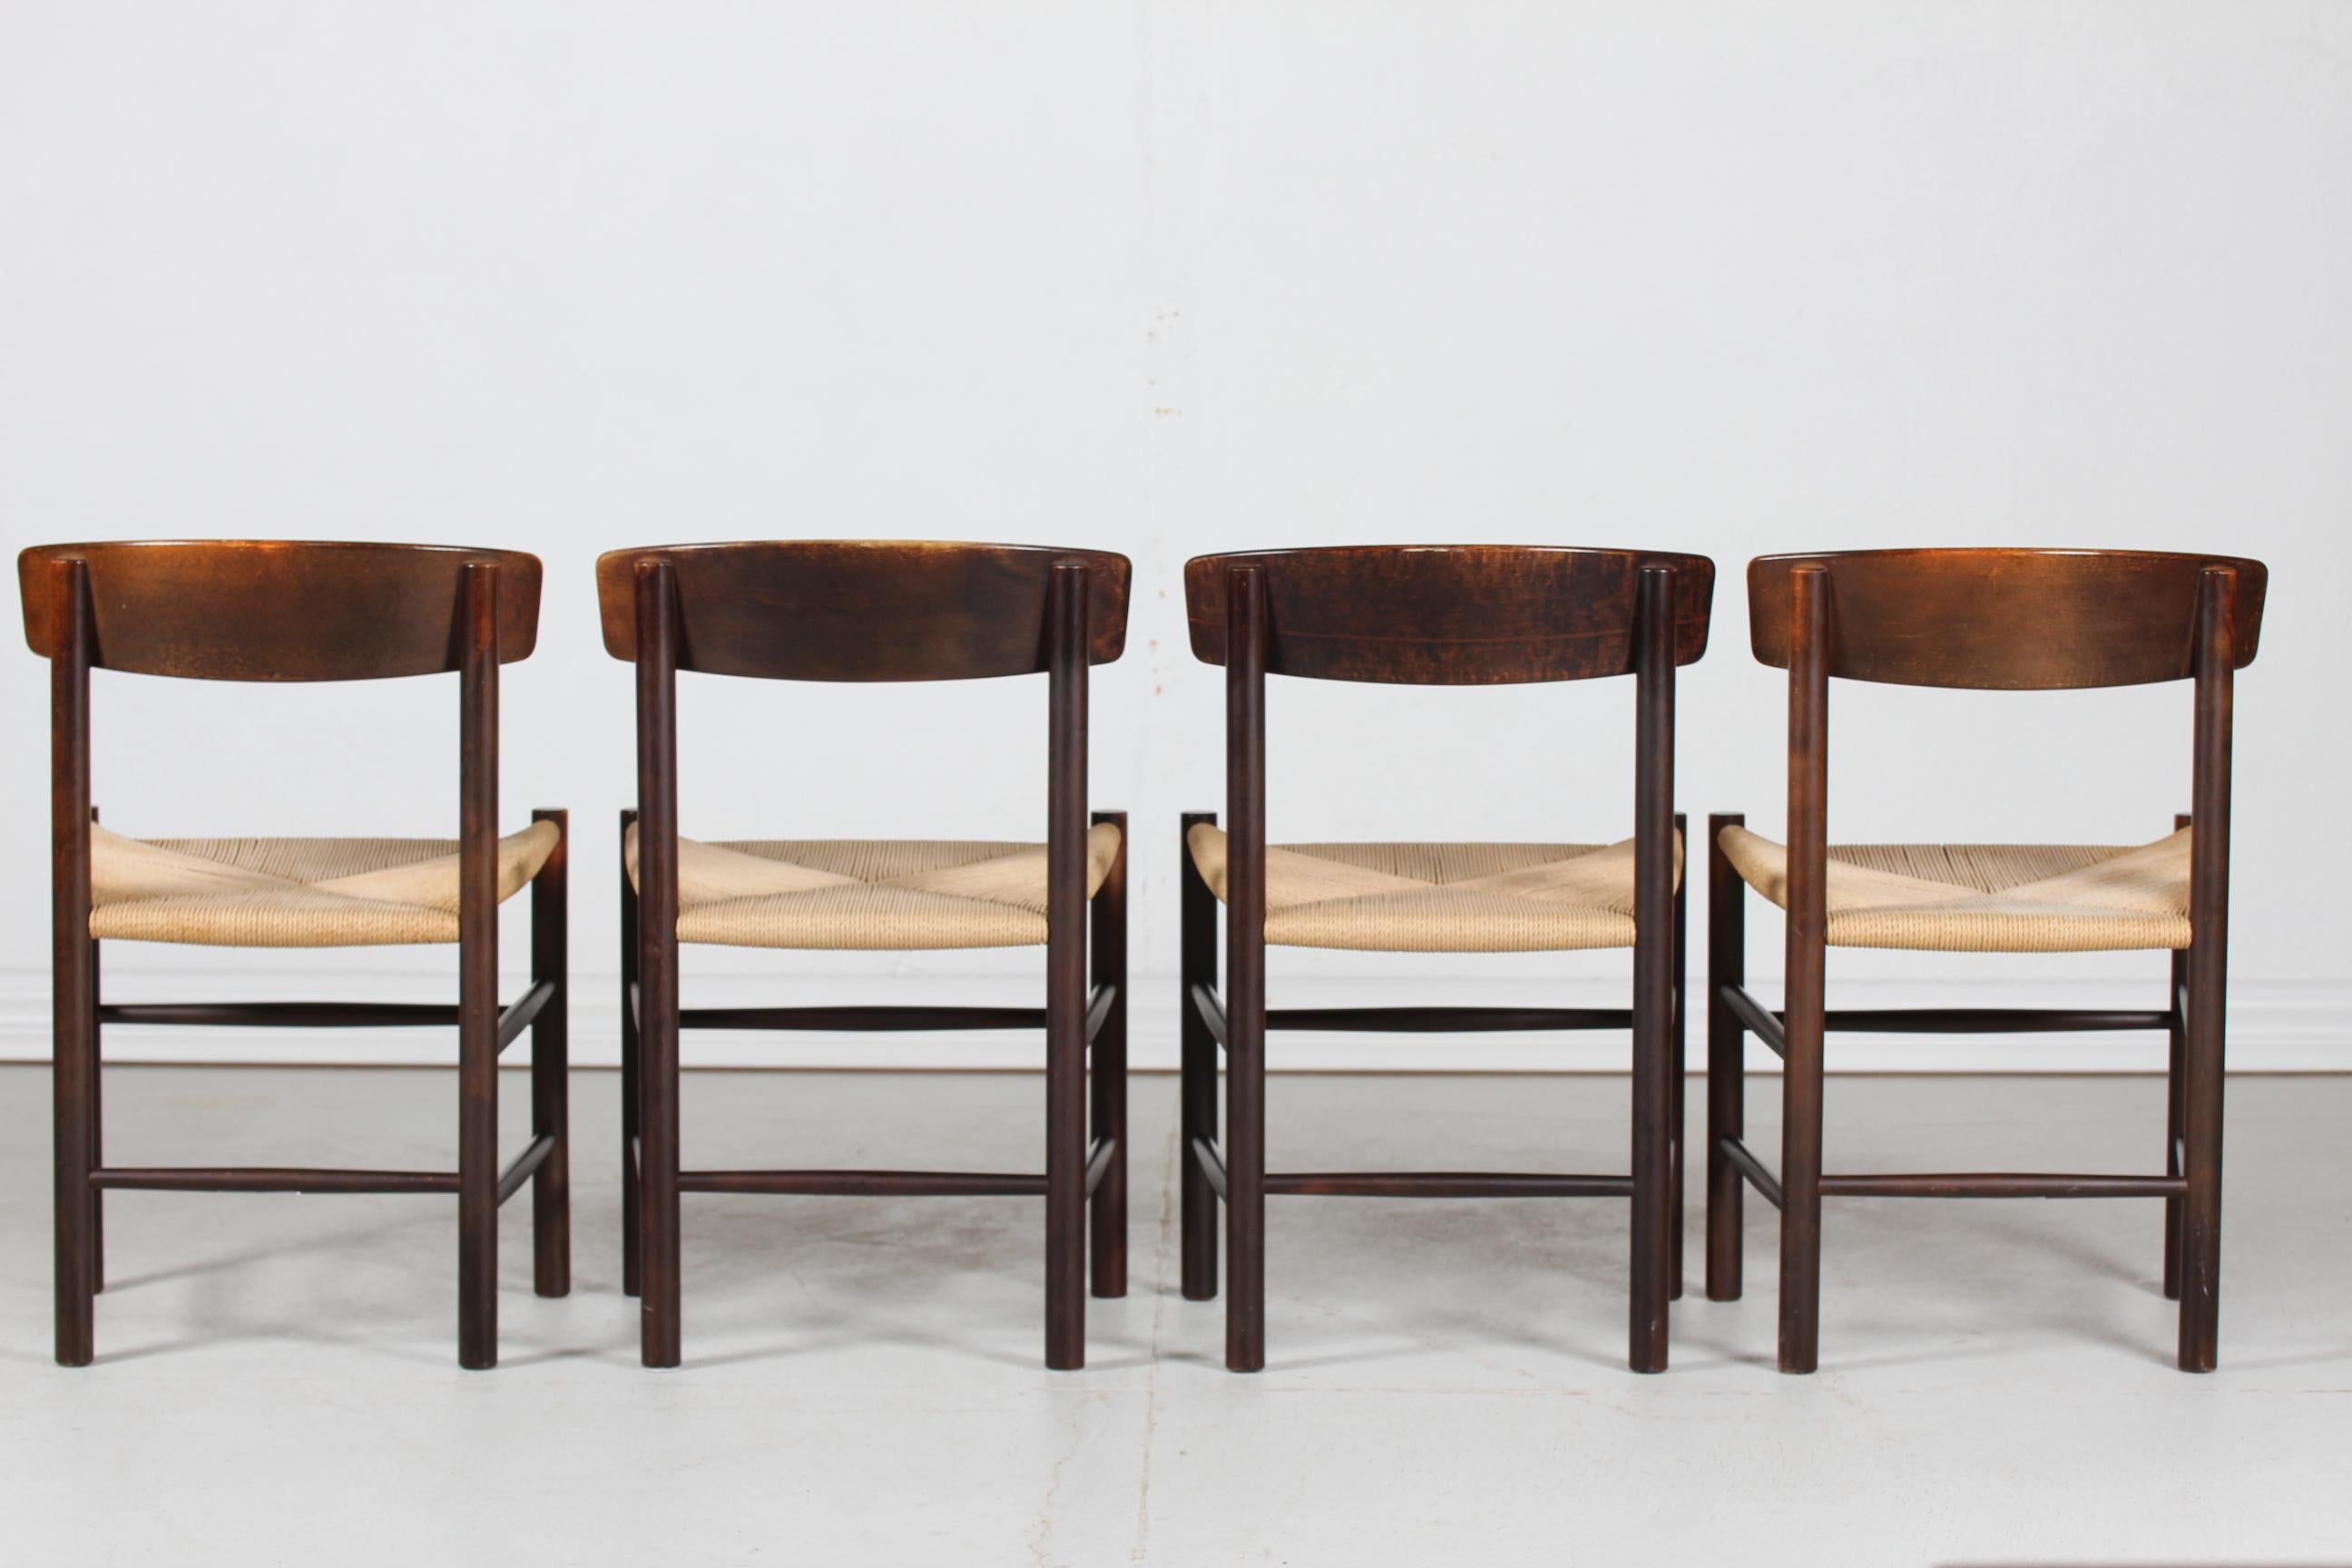 Set of four dining chairs model J 39 by the Danish furniture designer Børge Mogensen (1914-1972) 
The design classic called 